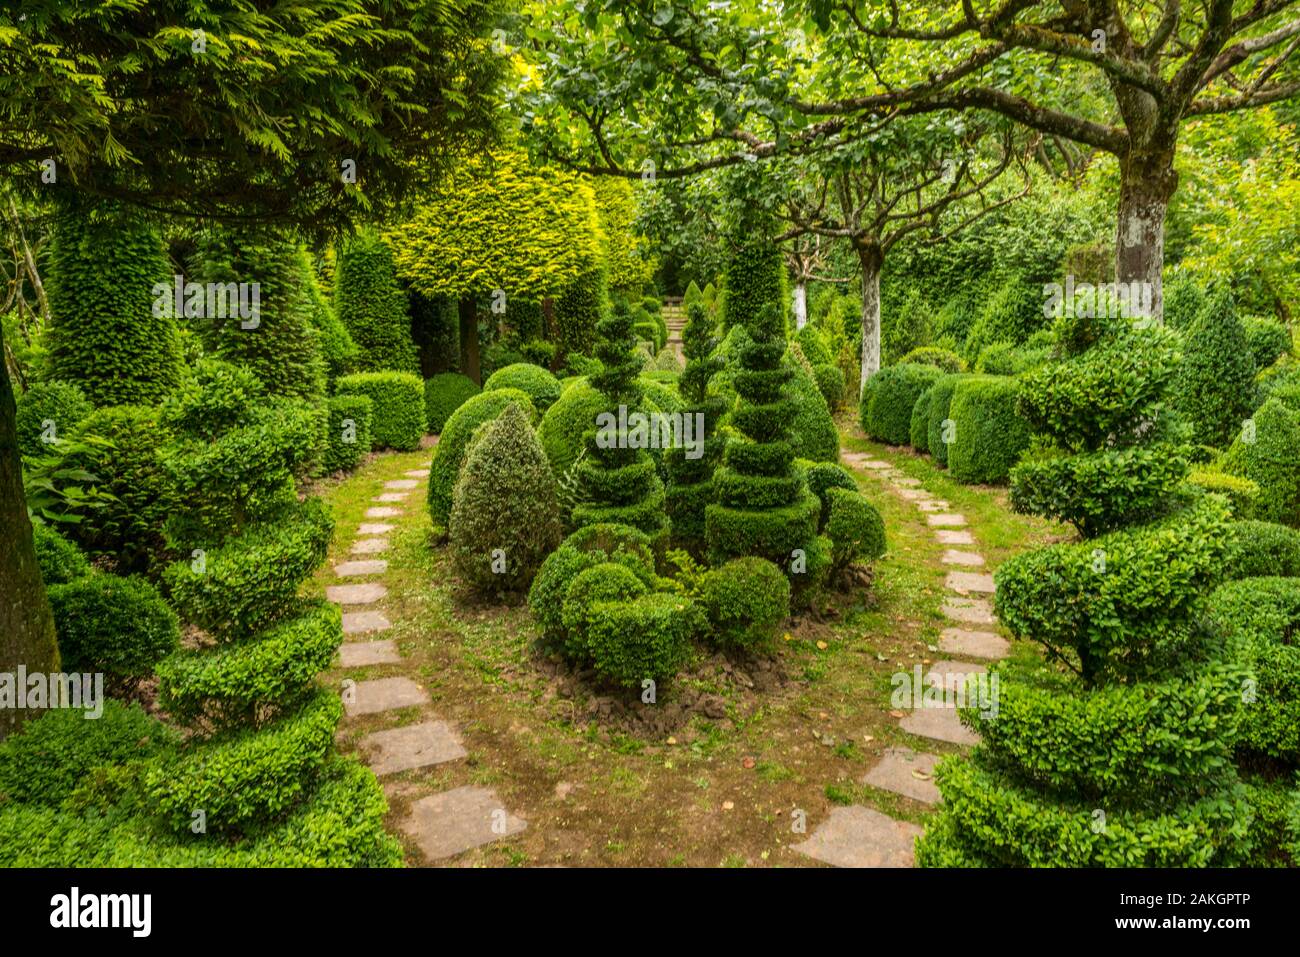 France, Pas de Calais, Séricourt, Les Jardins de Séricourt, park of more  than 4 hectares recognized as one of the most beautiful gardens of France  labeled Remarkable Garden by the Ministry of